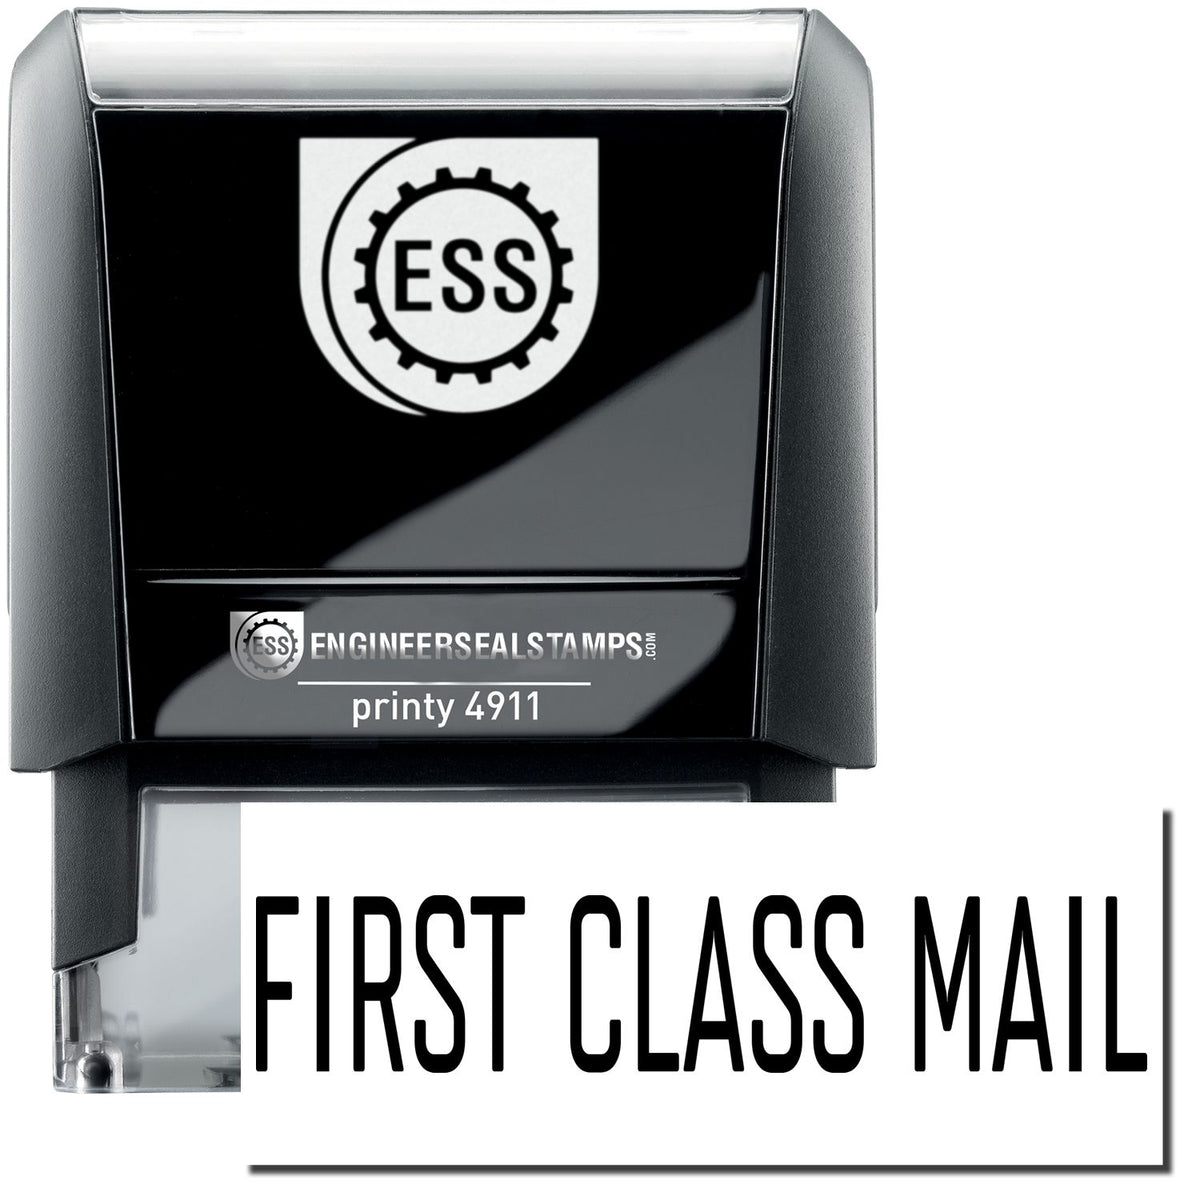 A self-inking stamp with a stamped image showing how the text &quot;FIRST CLASS MAIL&quot; in a narrow font is displayed after stamping.